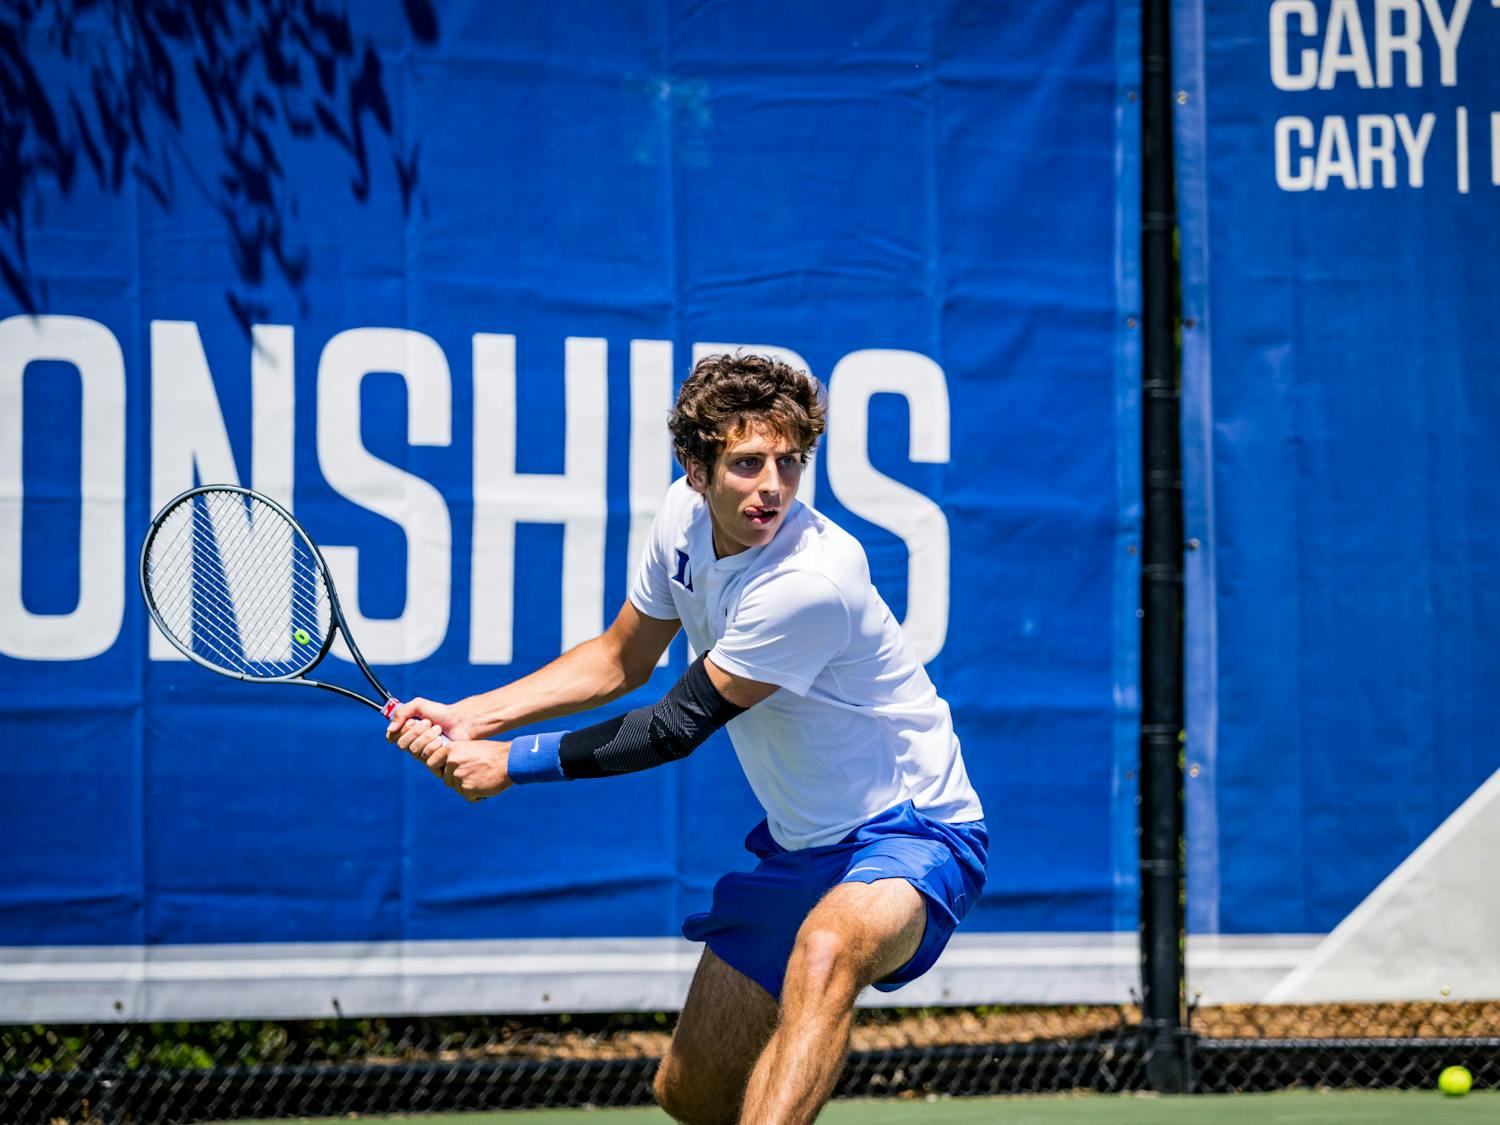 Pedro Rodenas took down Iñaki Montes, the reigning ACC Player of the Year, in straight sets Sunday.